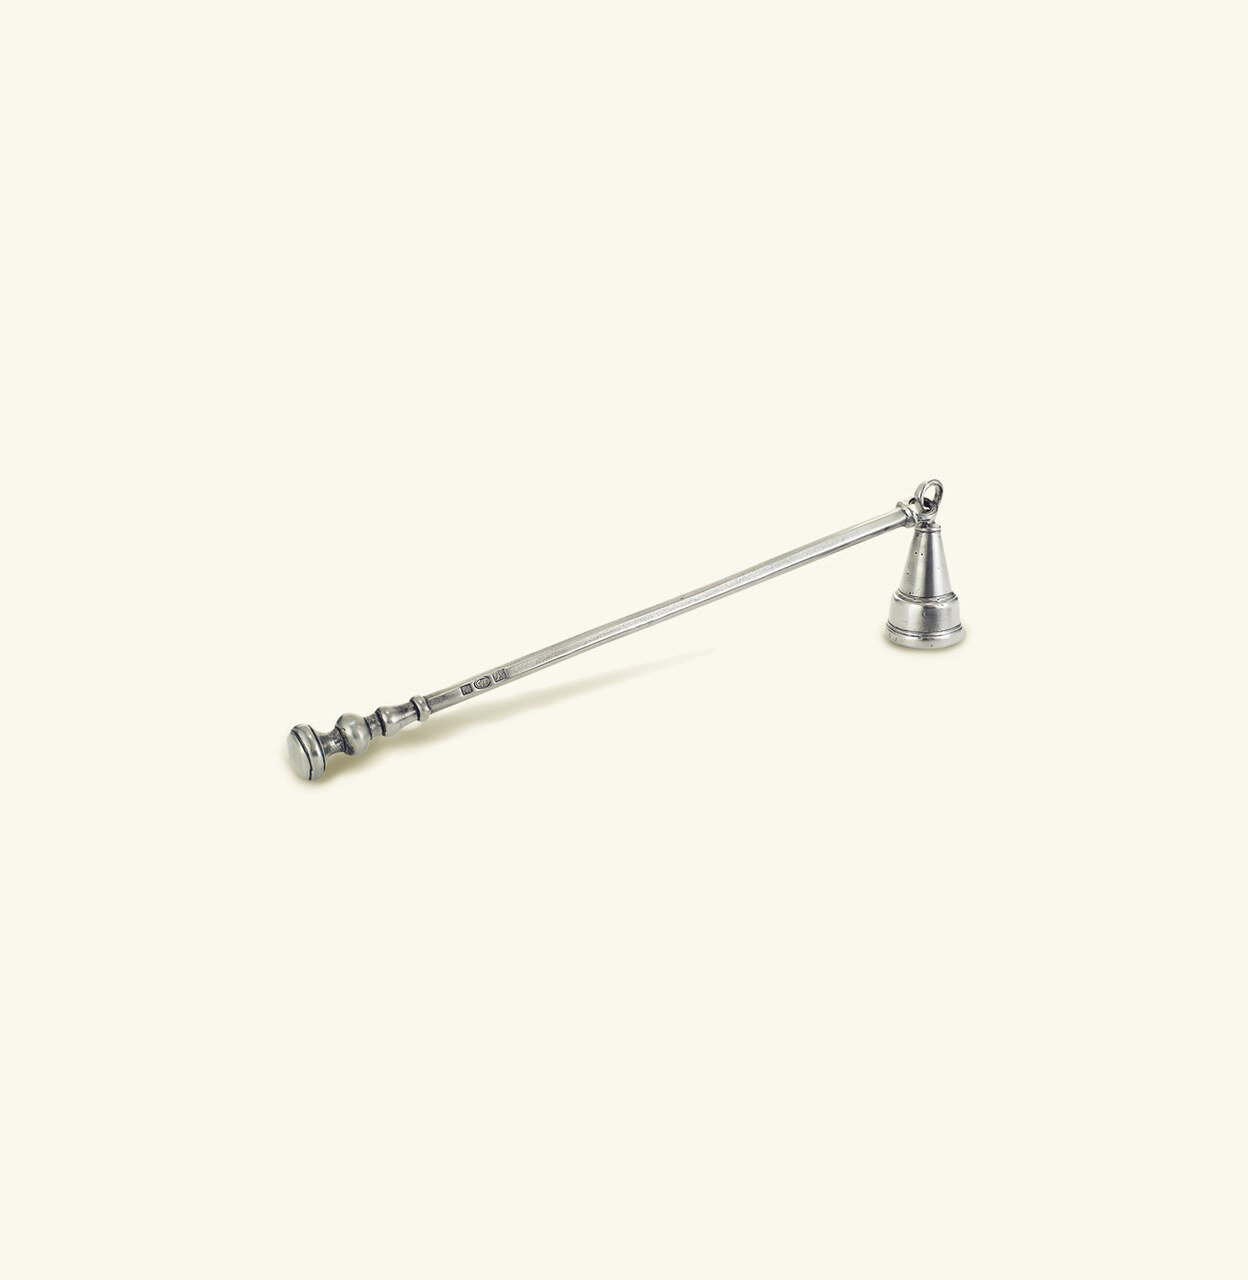 Match Pewter Hinged Snuffer a867.0